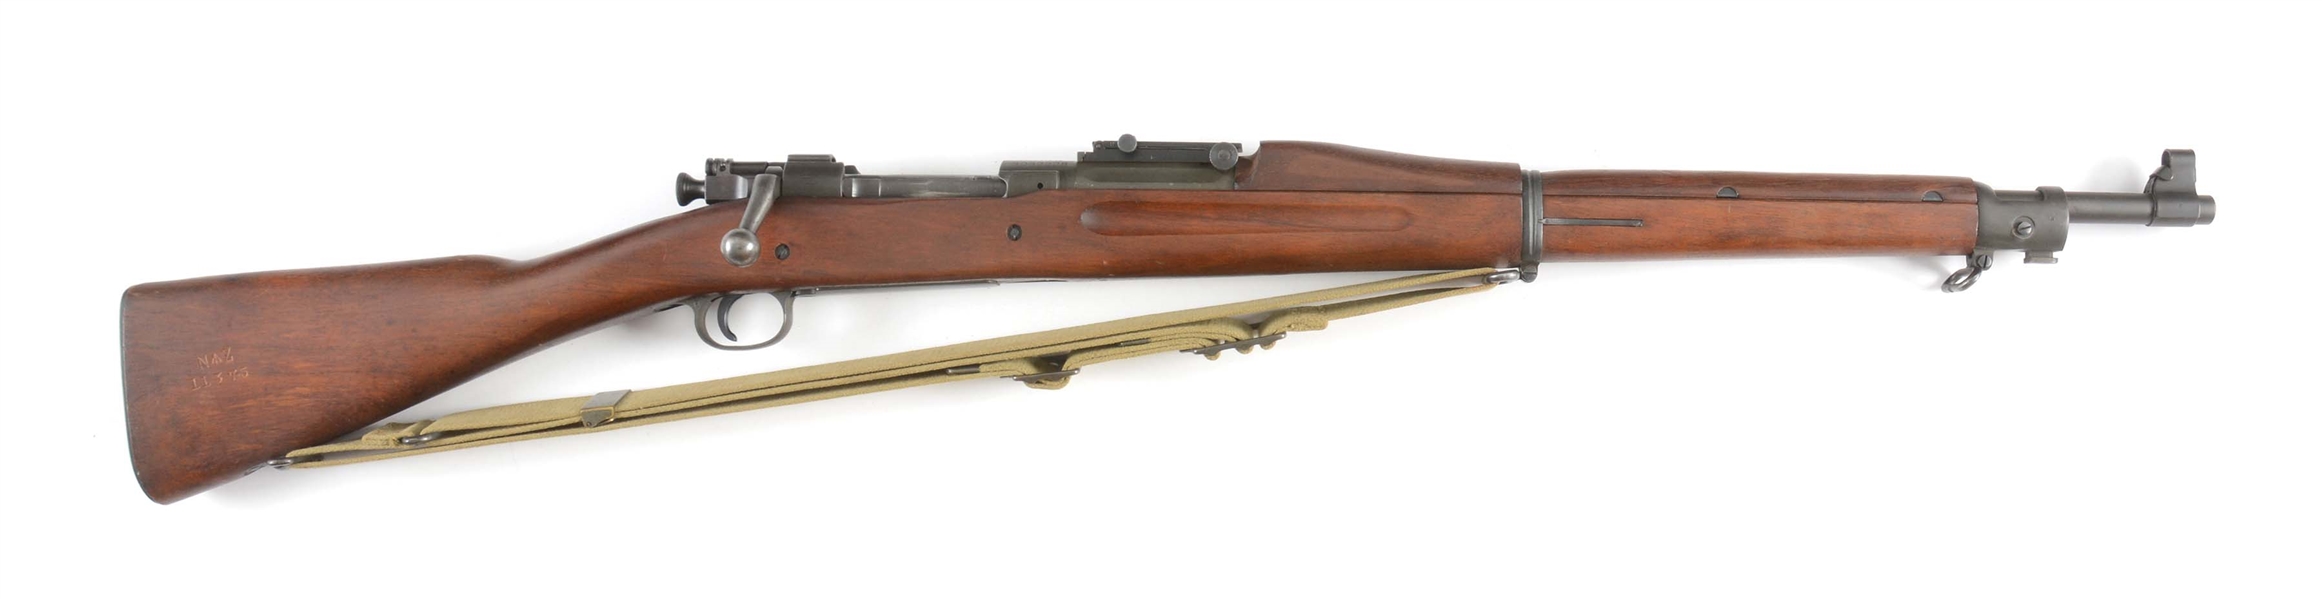 (C) FINE AND RARE NEW ZEALAND MARKED LEND LEASE REMINGTON MODEL 1903 WWII BOLT ACTION RIFLE, DATED 12-41.